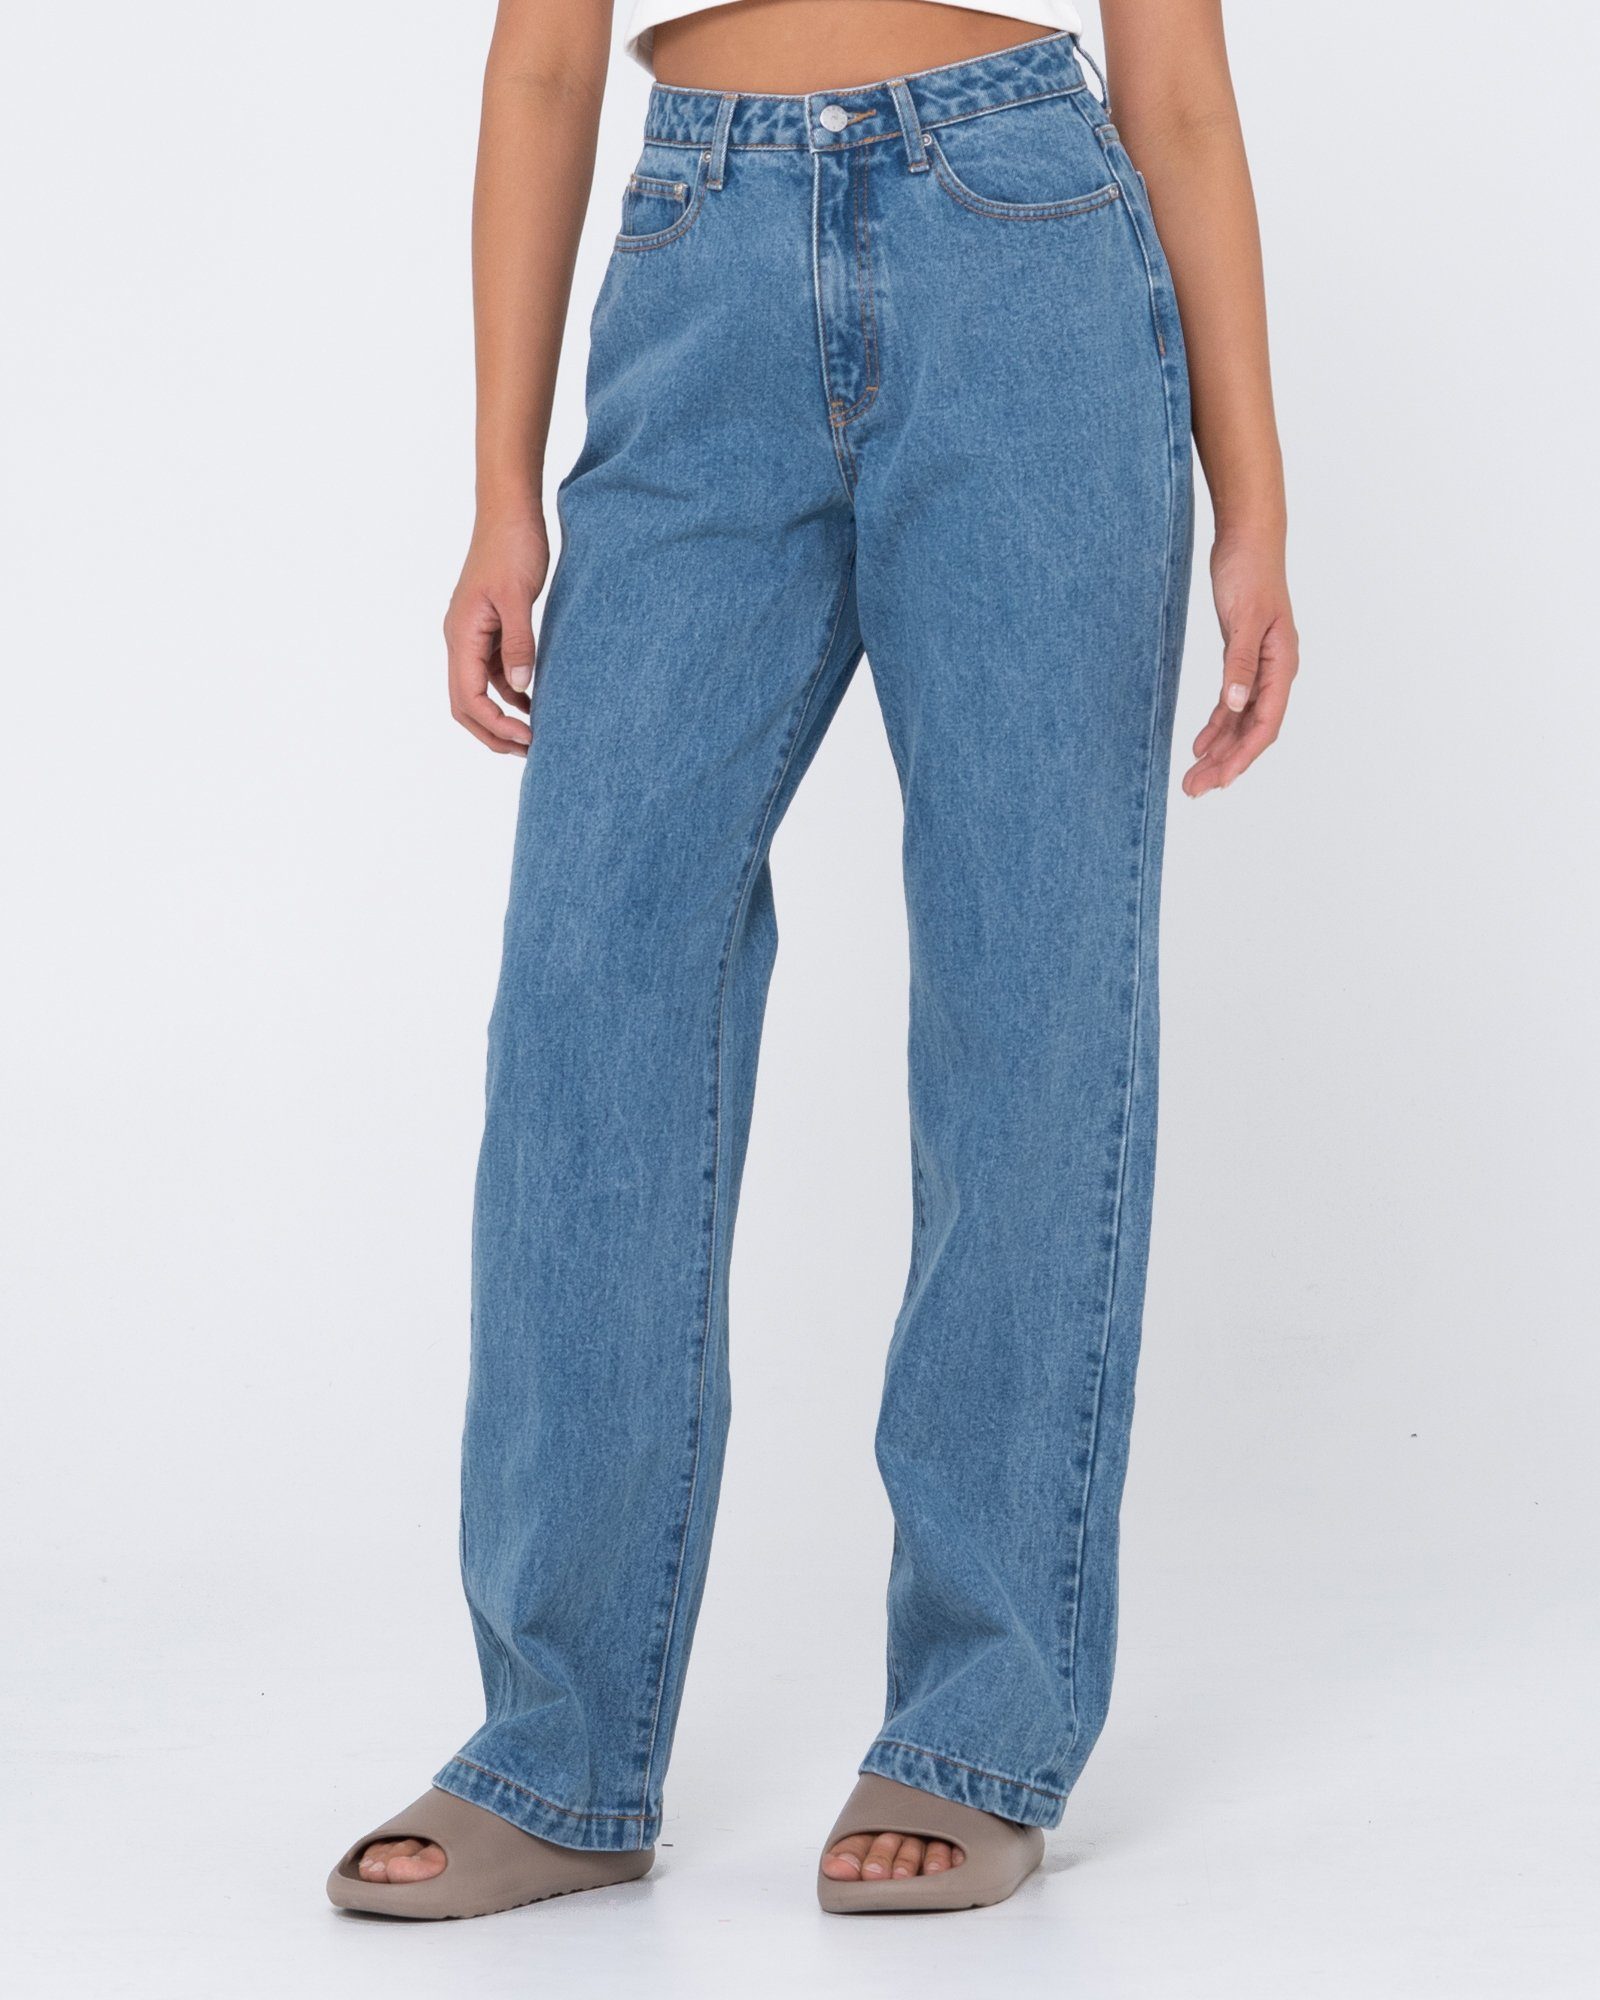 Jeans - Sea JEAN Rusty Weite HIGH BAGGY Blue